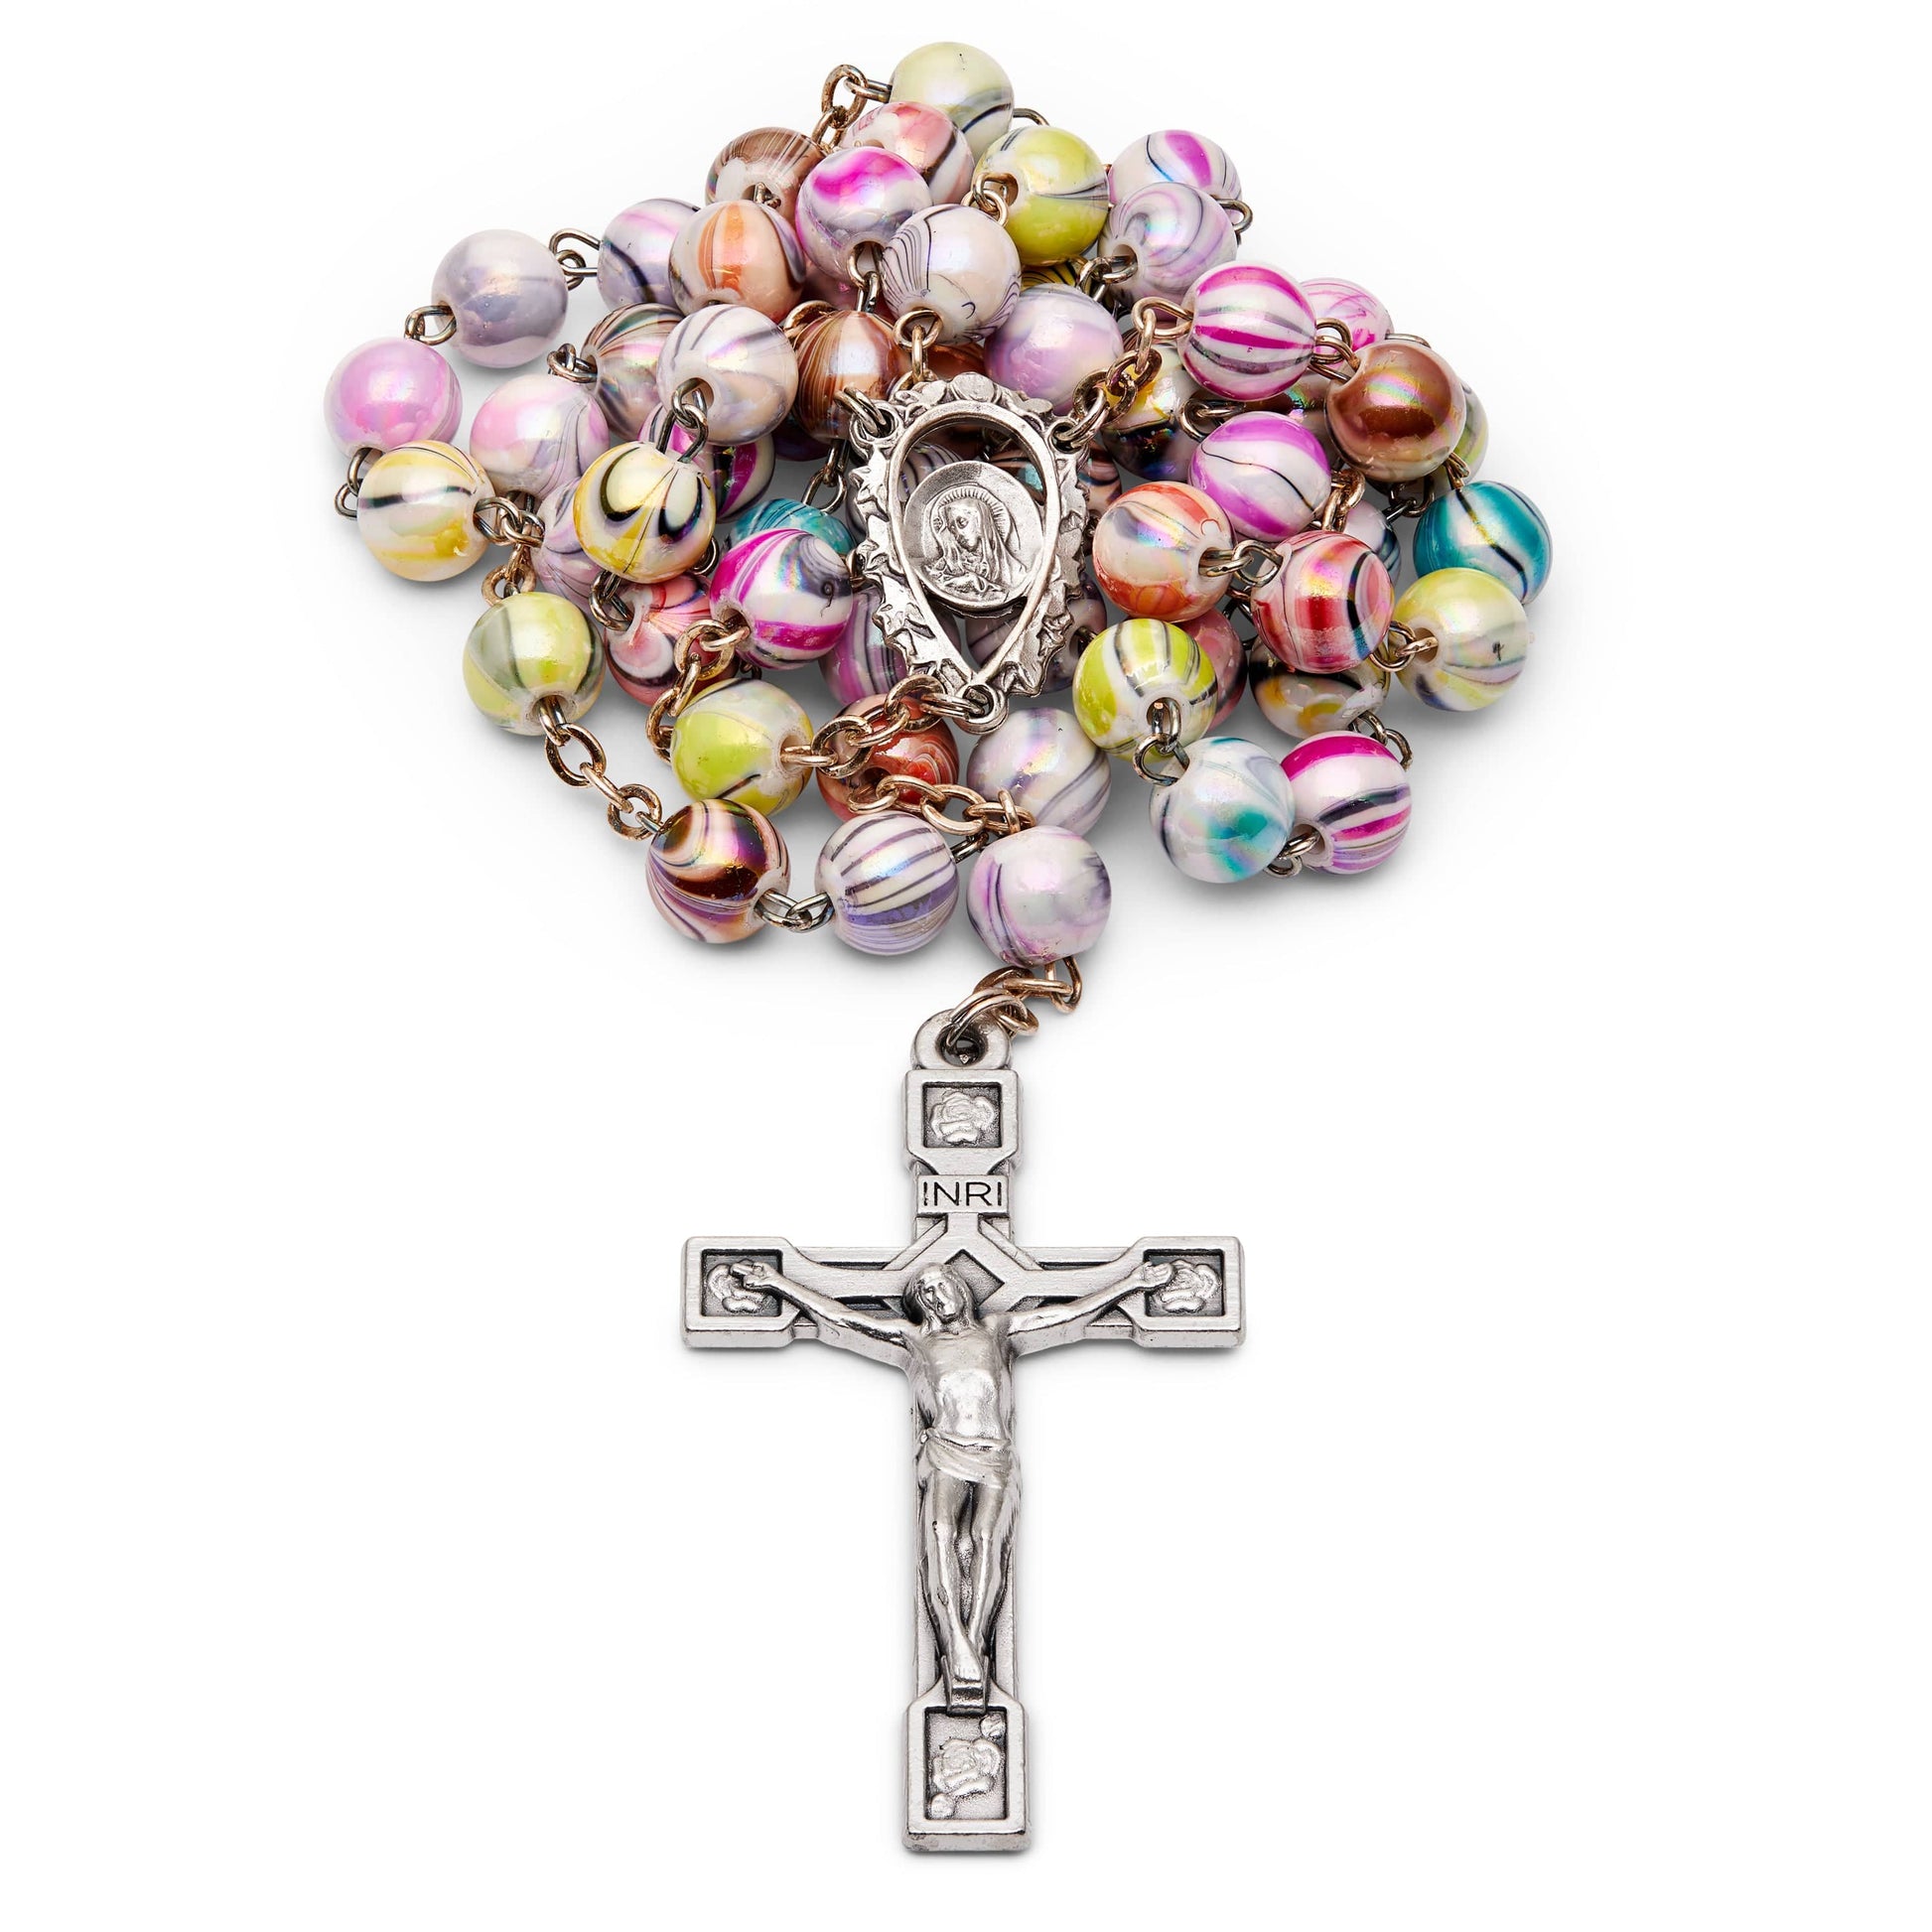 MONDO CATTOLICO Prayer Beads 54 cm (21.25 in) / 8 mm (0.31 in) Our Lady of Sorrow Multicolor Rosary beads